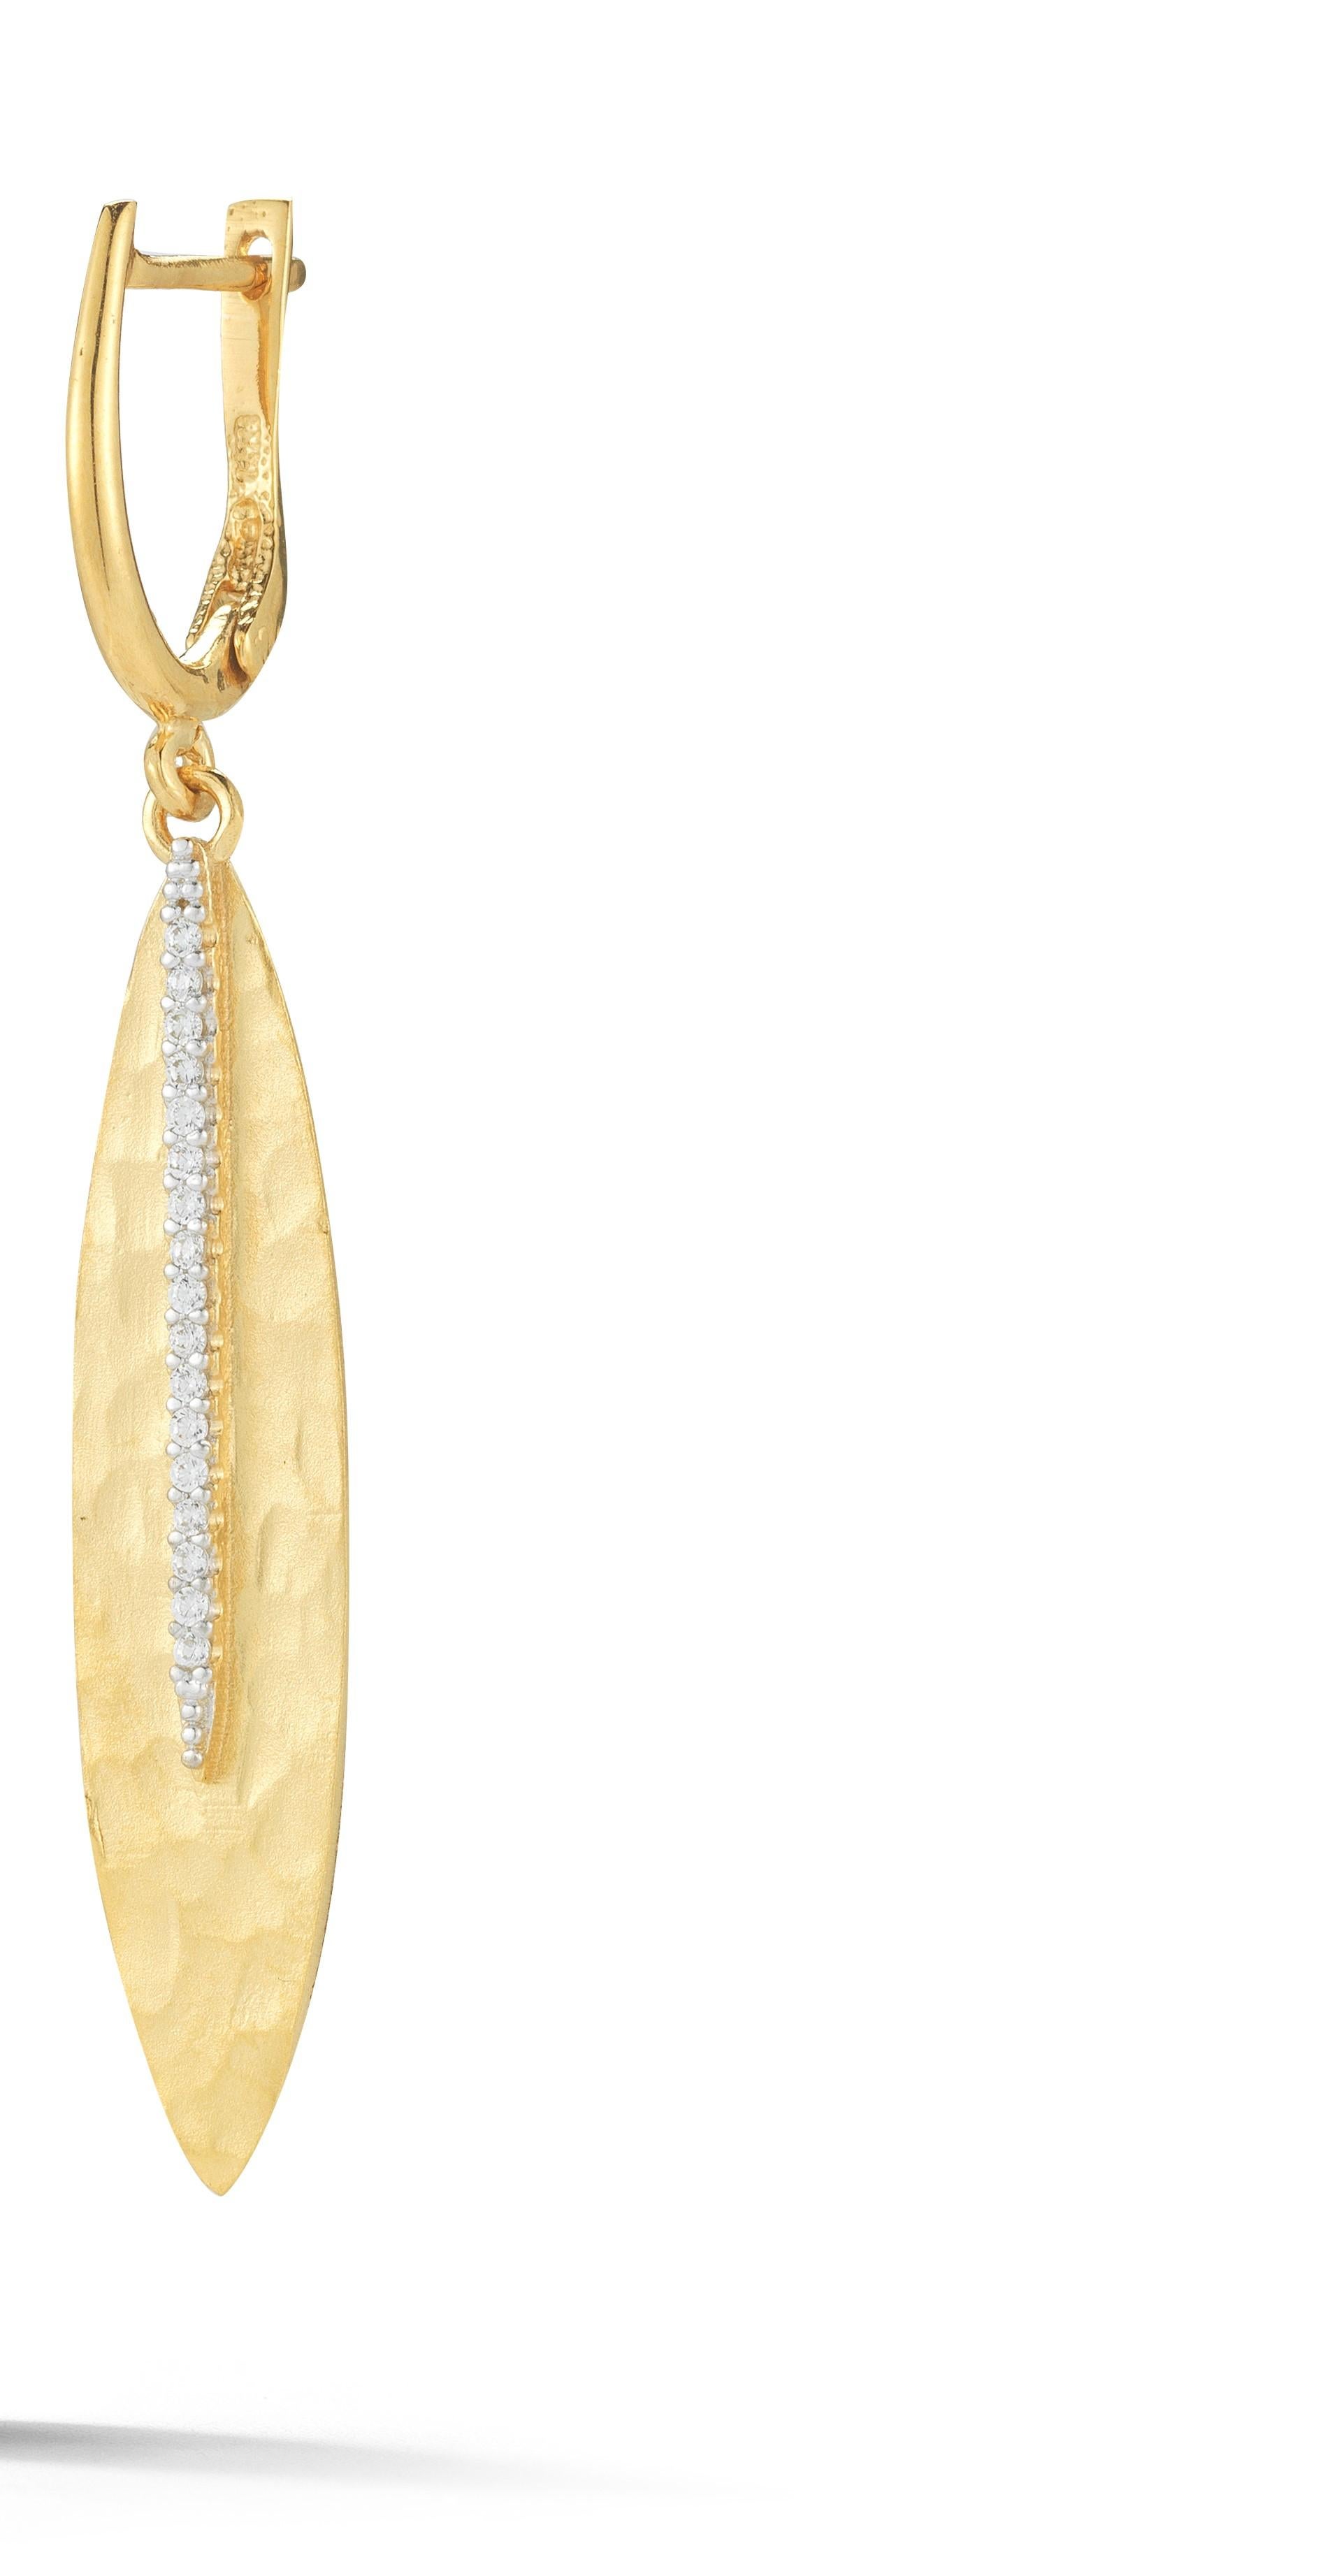 14 Karat Yellow Gold Hand-Crafted Matte and Hammer-Finished Dangling Leaf Earrings, Centered with 0.20 Carats of Pave Set Diamond Veins.
